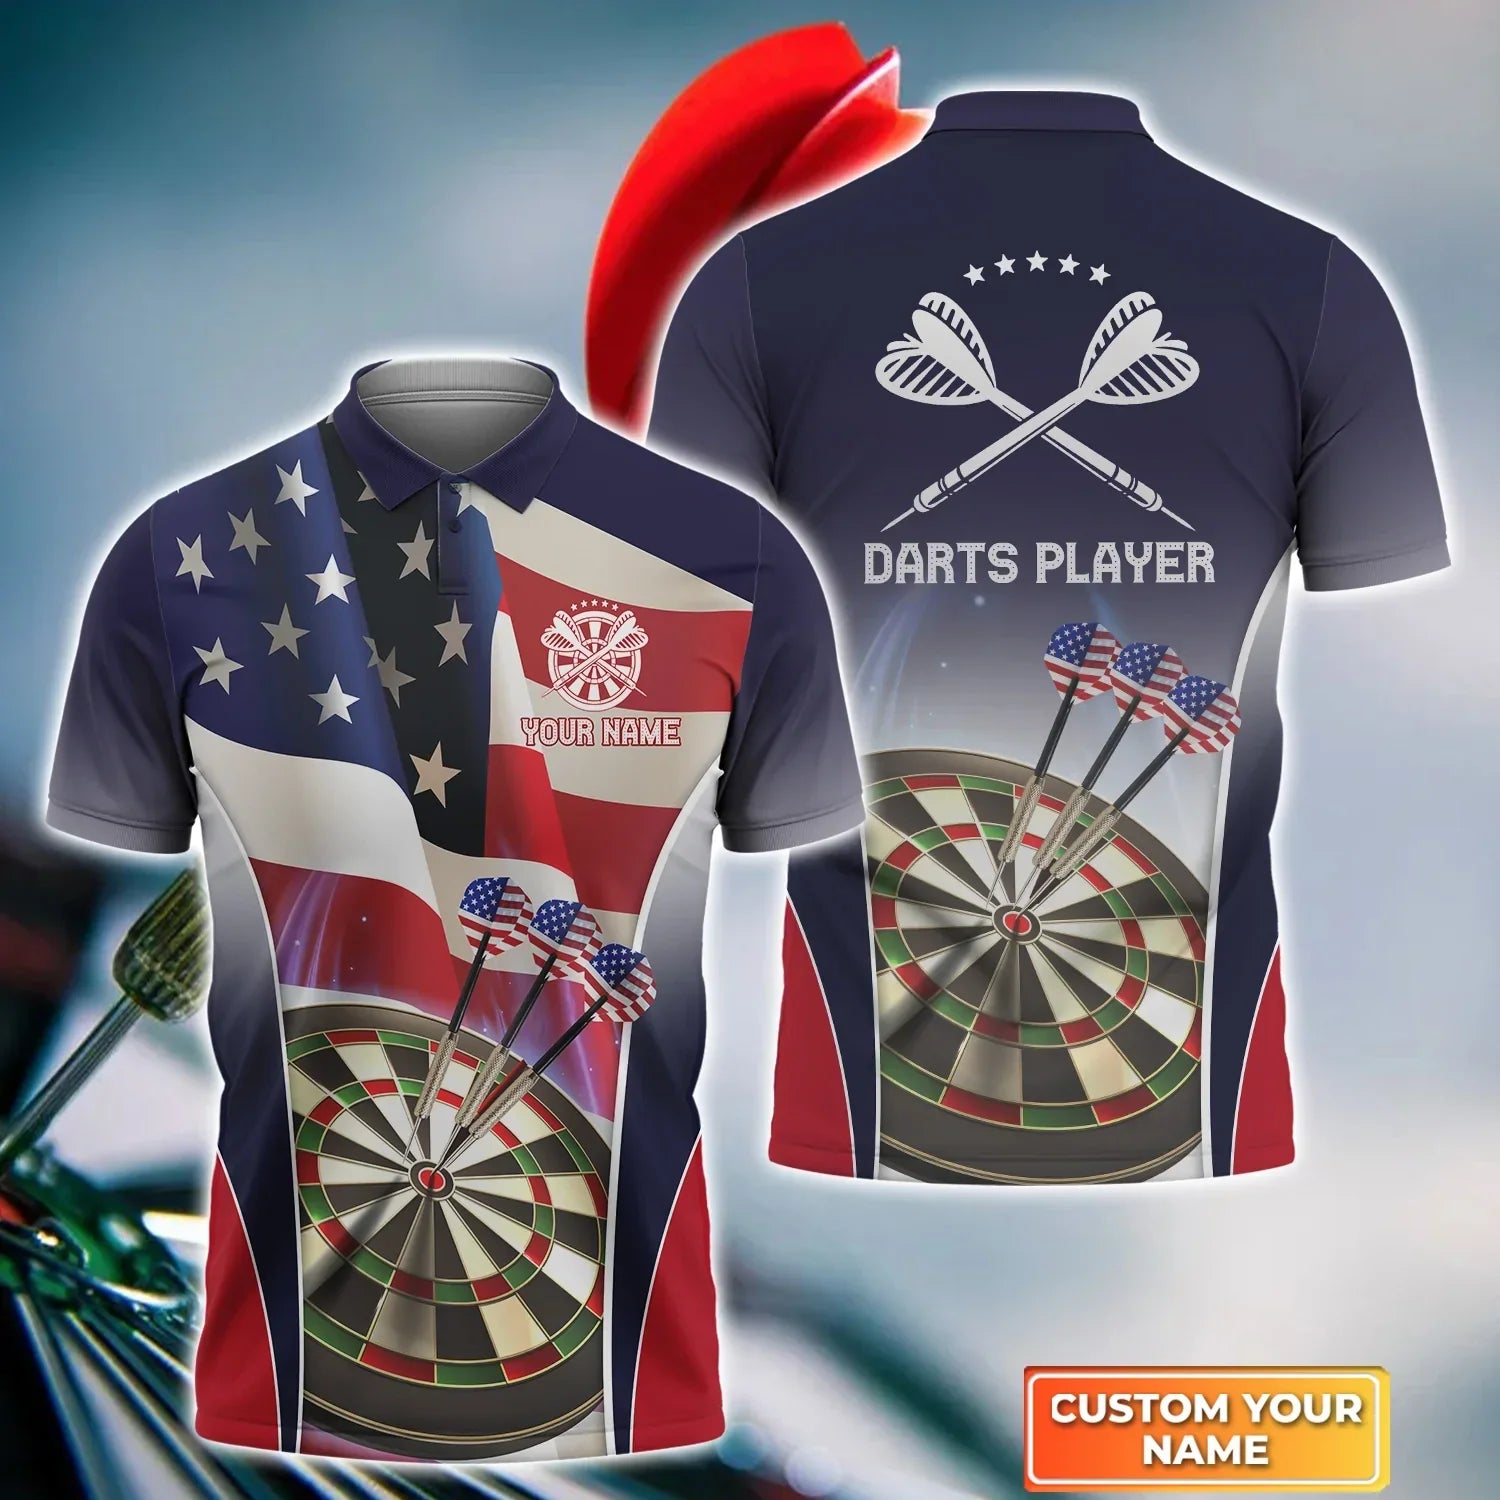 American Darts Player Polo 3D Shirt For Darts Player/ Dart Shirt/ Sports Shirt/ Dart Team Shirts